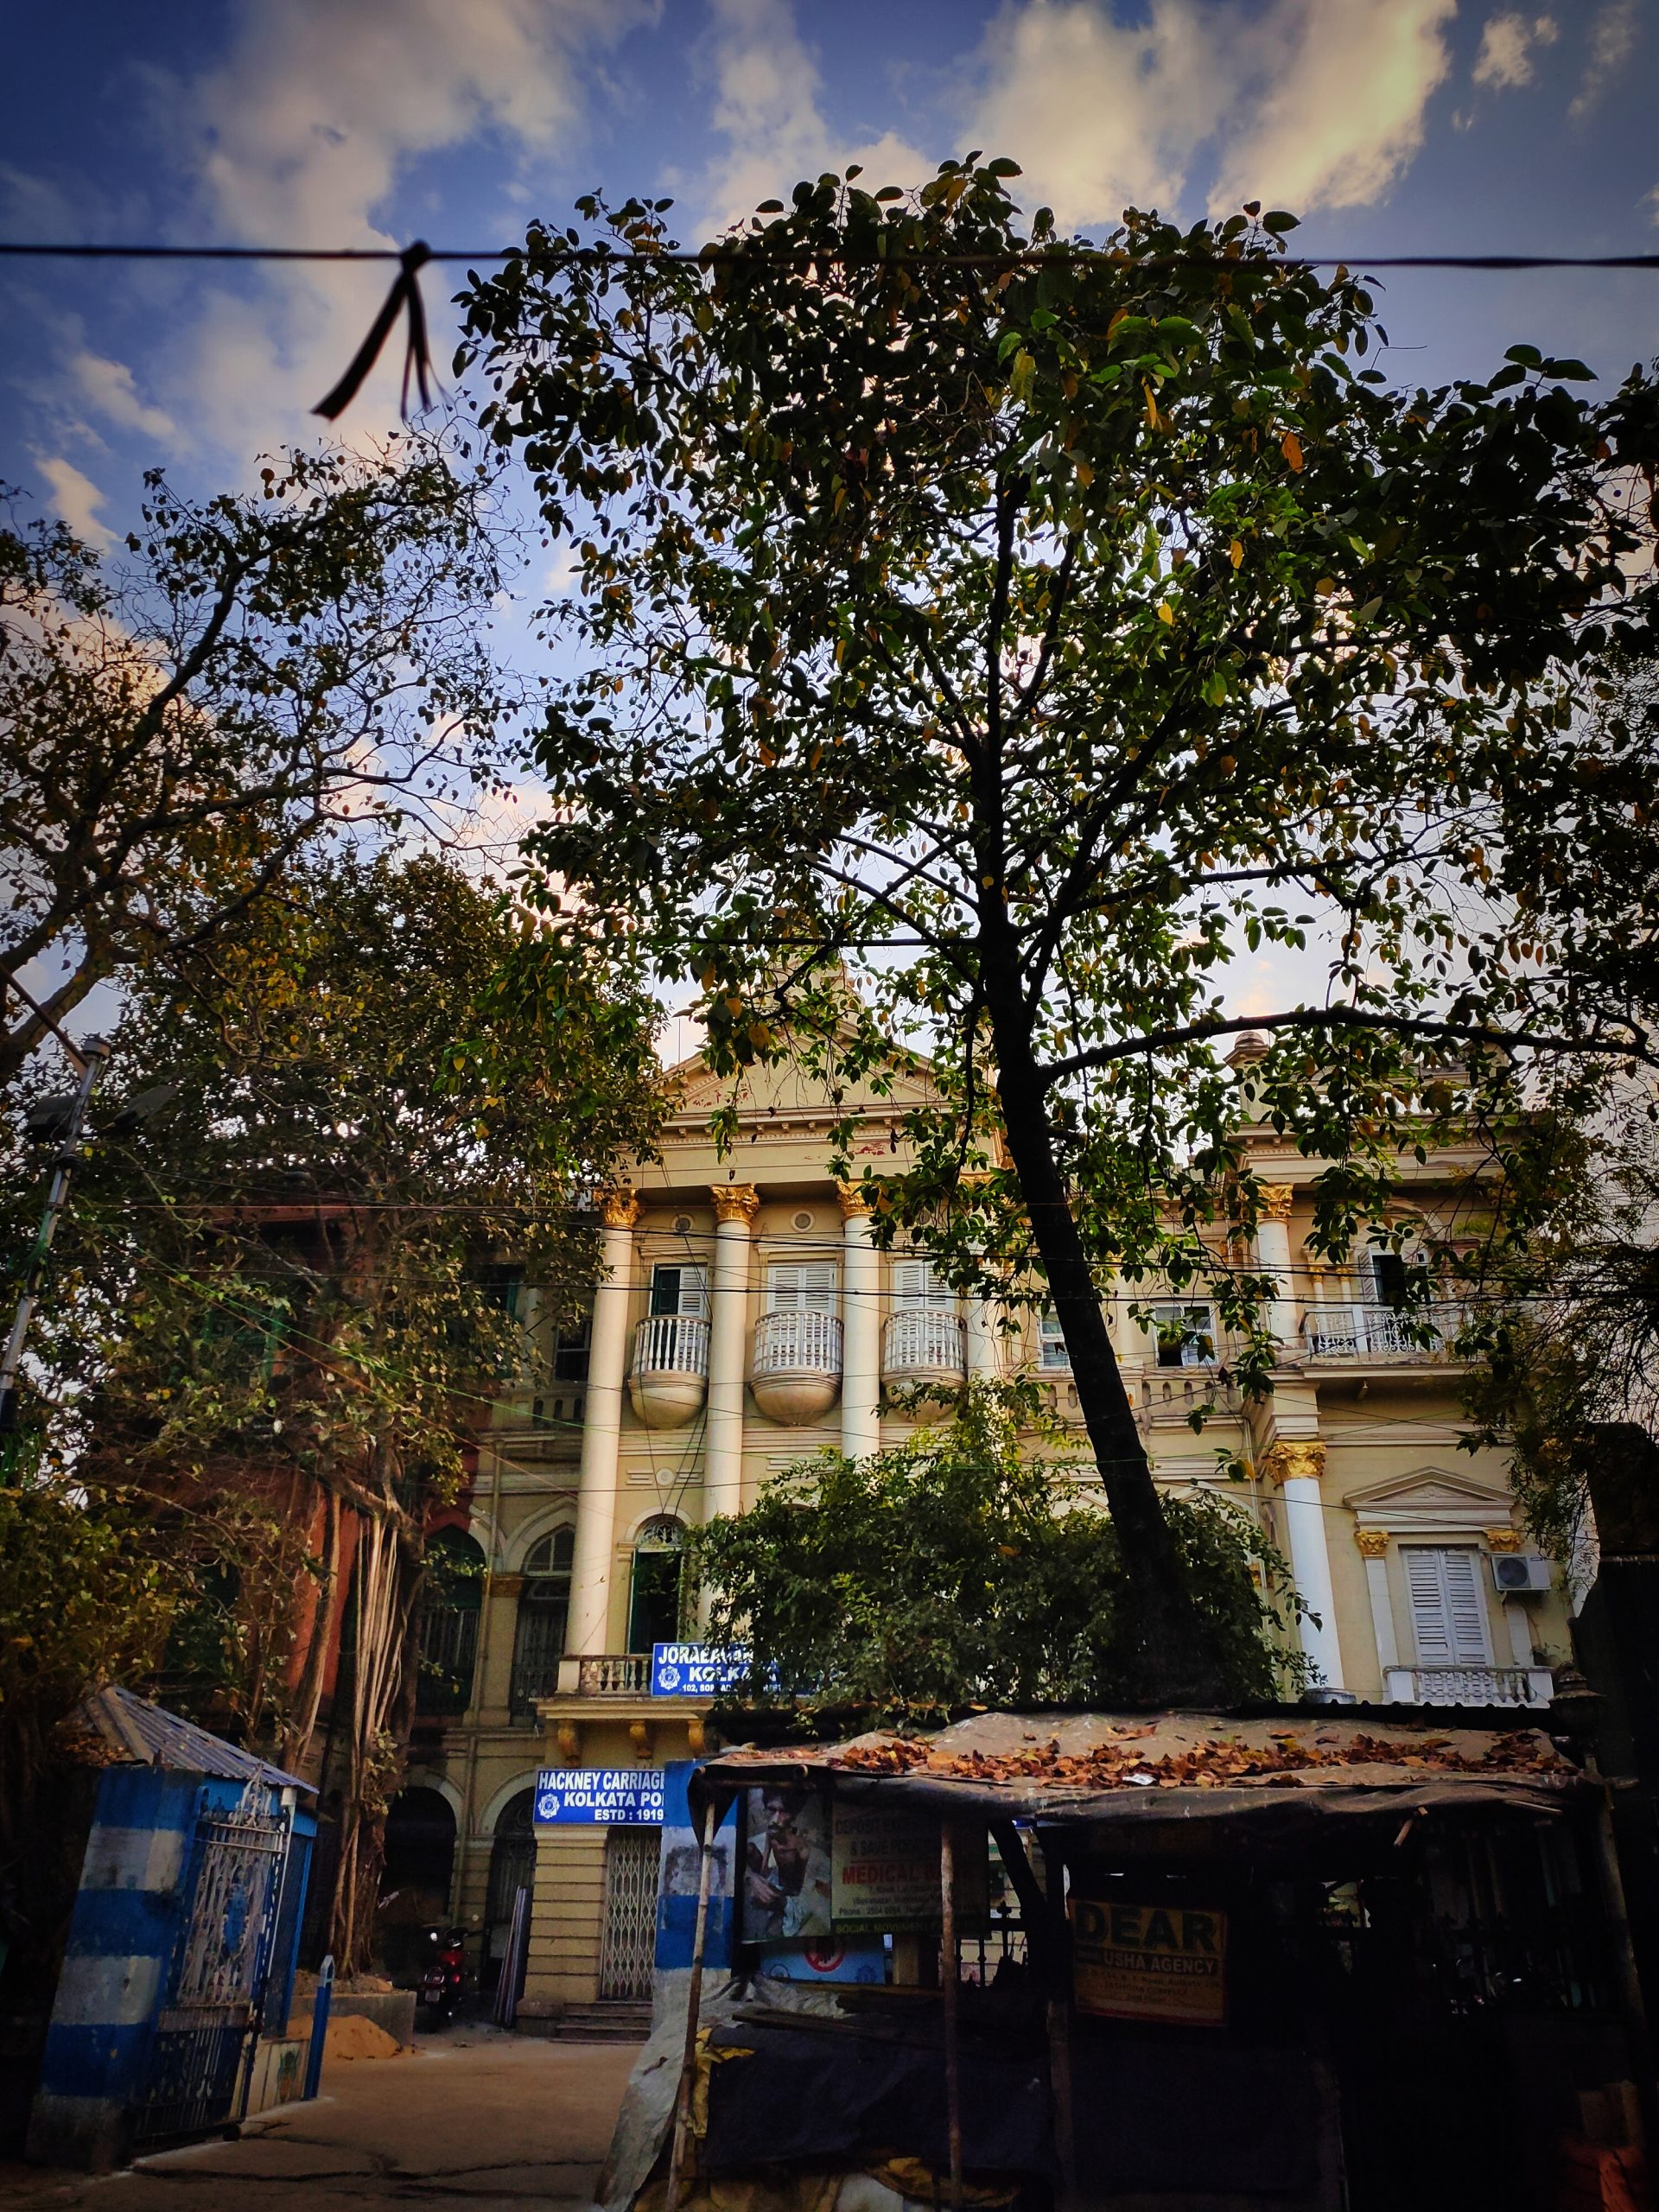 A building under trees